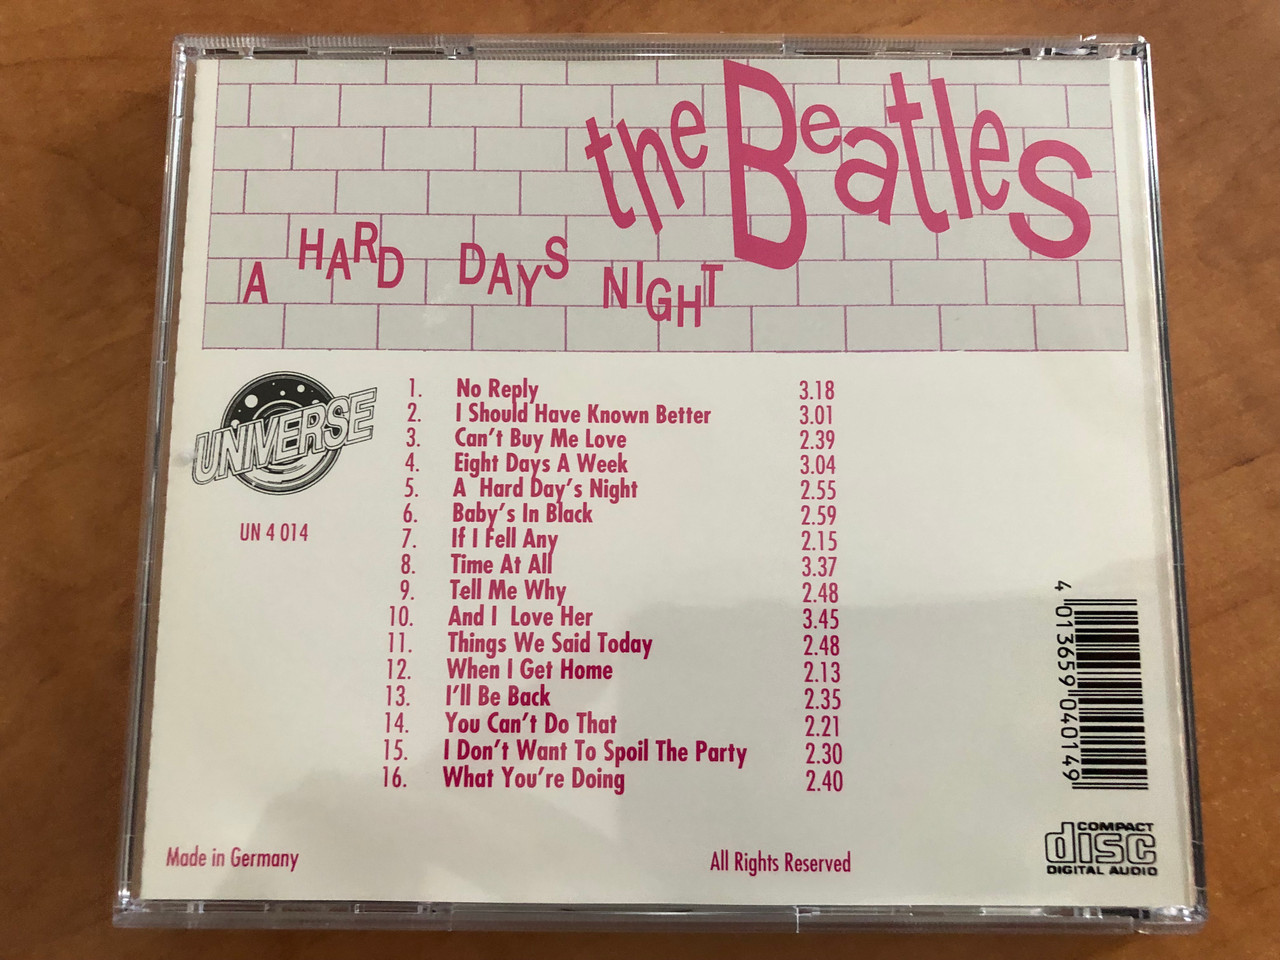 https://cdn10.bigcommerce.com/s-62bdpkt7pb/products/30847/images/181992/The_Beatles_A_Hard_Days_Night_Universe_Audio_CD_1993_Stereo_UN_4_014_4__37328.1624019219.1280.1280.JPG?c=2